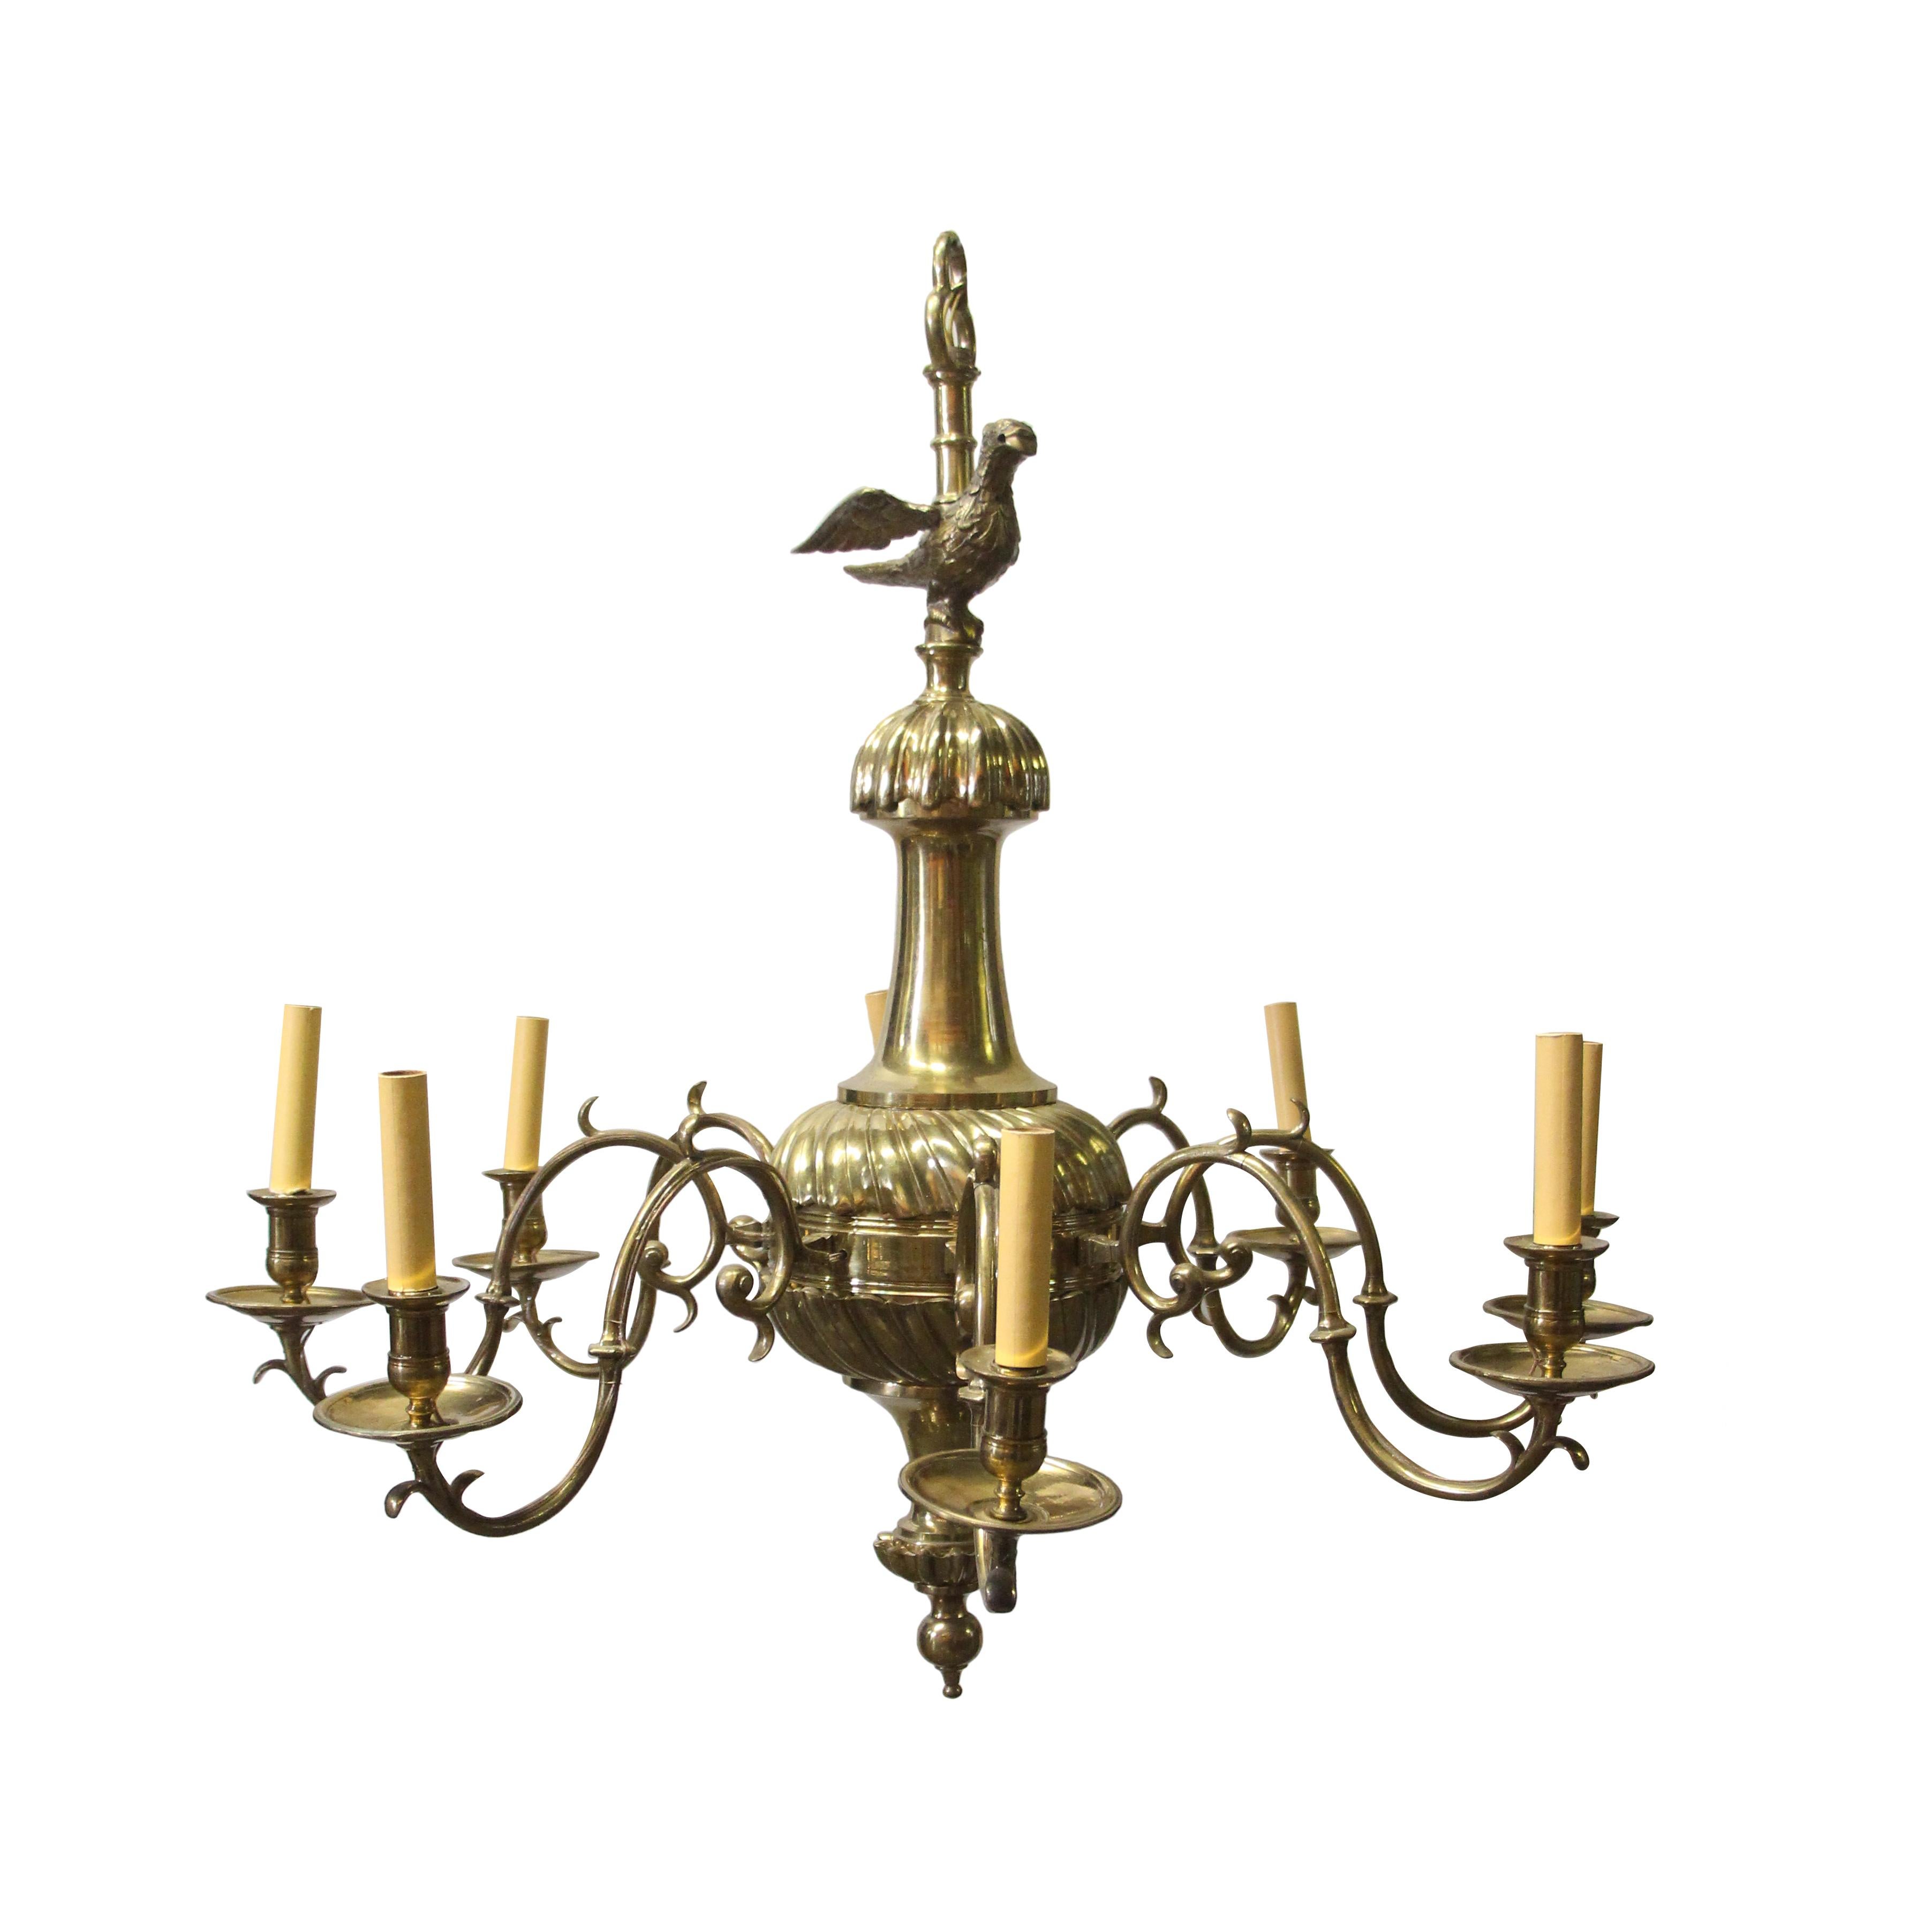 Williamsburg Style cast brass chandelier with 8-arms and eagle finial. This Early 20th Century Chandelier originally hung in the executive office of The New York Stock Exchange, New York City until the early 21st Century. The eagle has a hole where